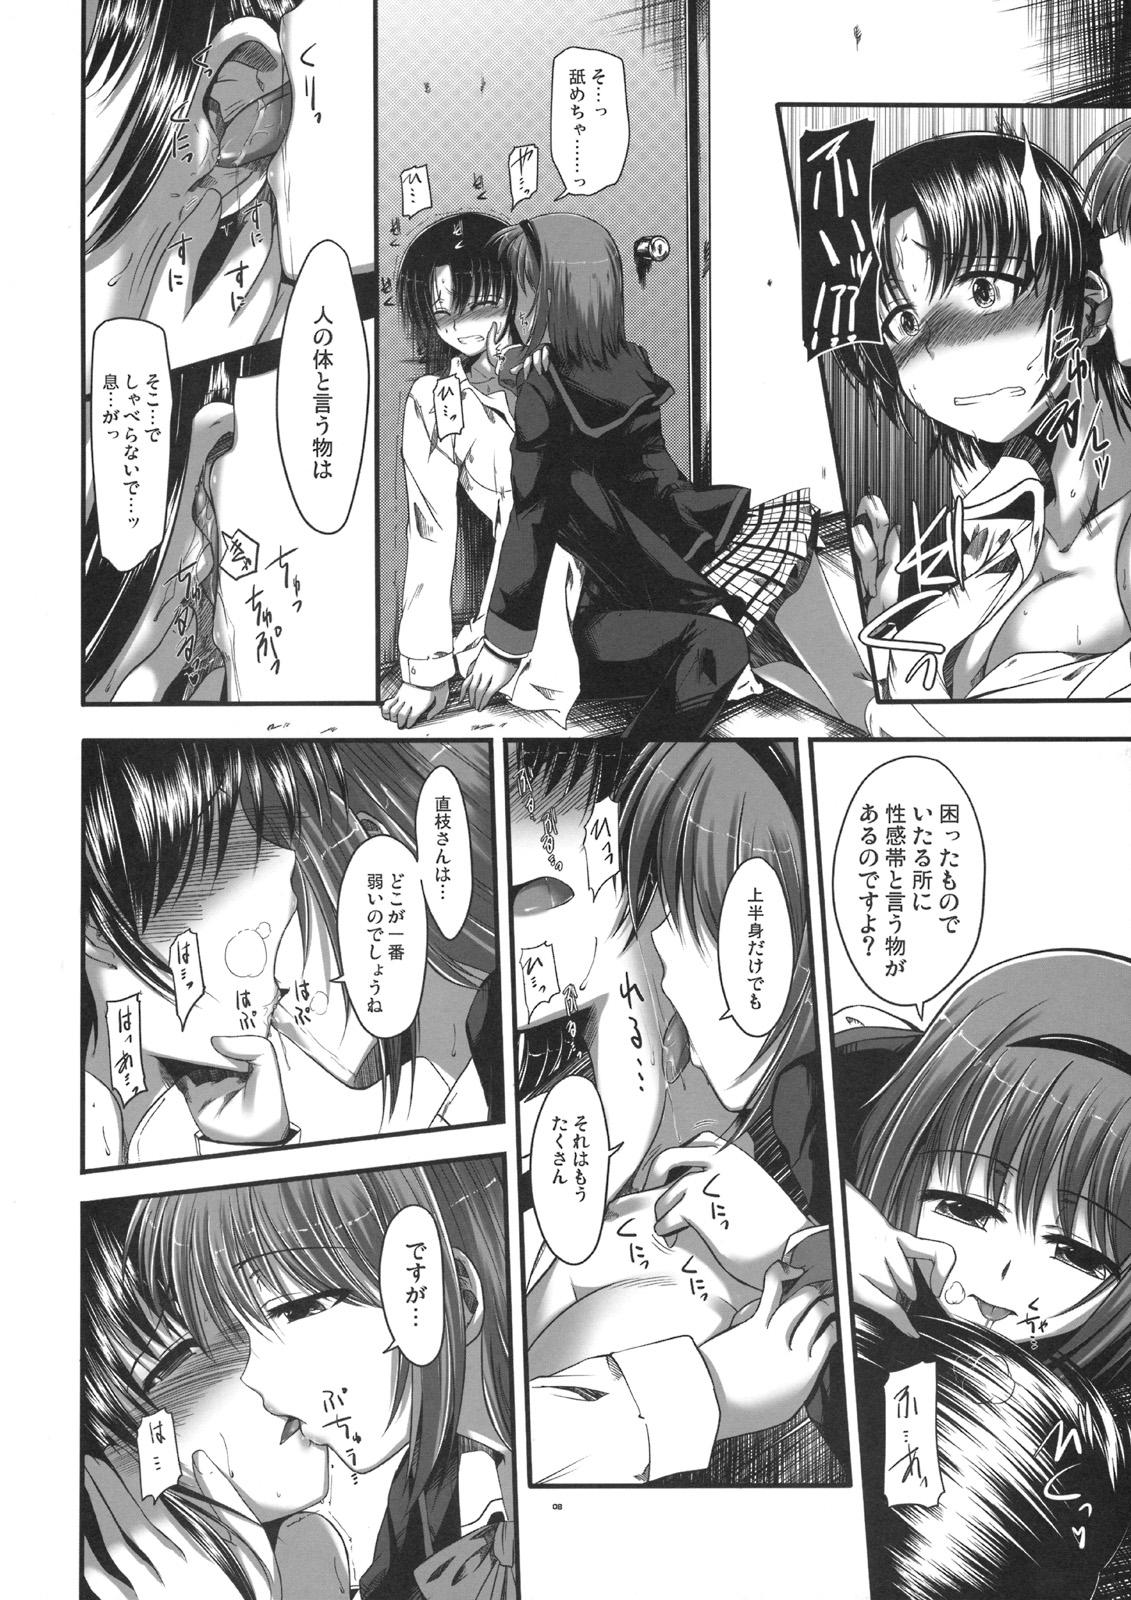 Spit Rikyuuru - Little busters Submission - Page 7